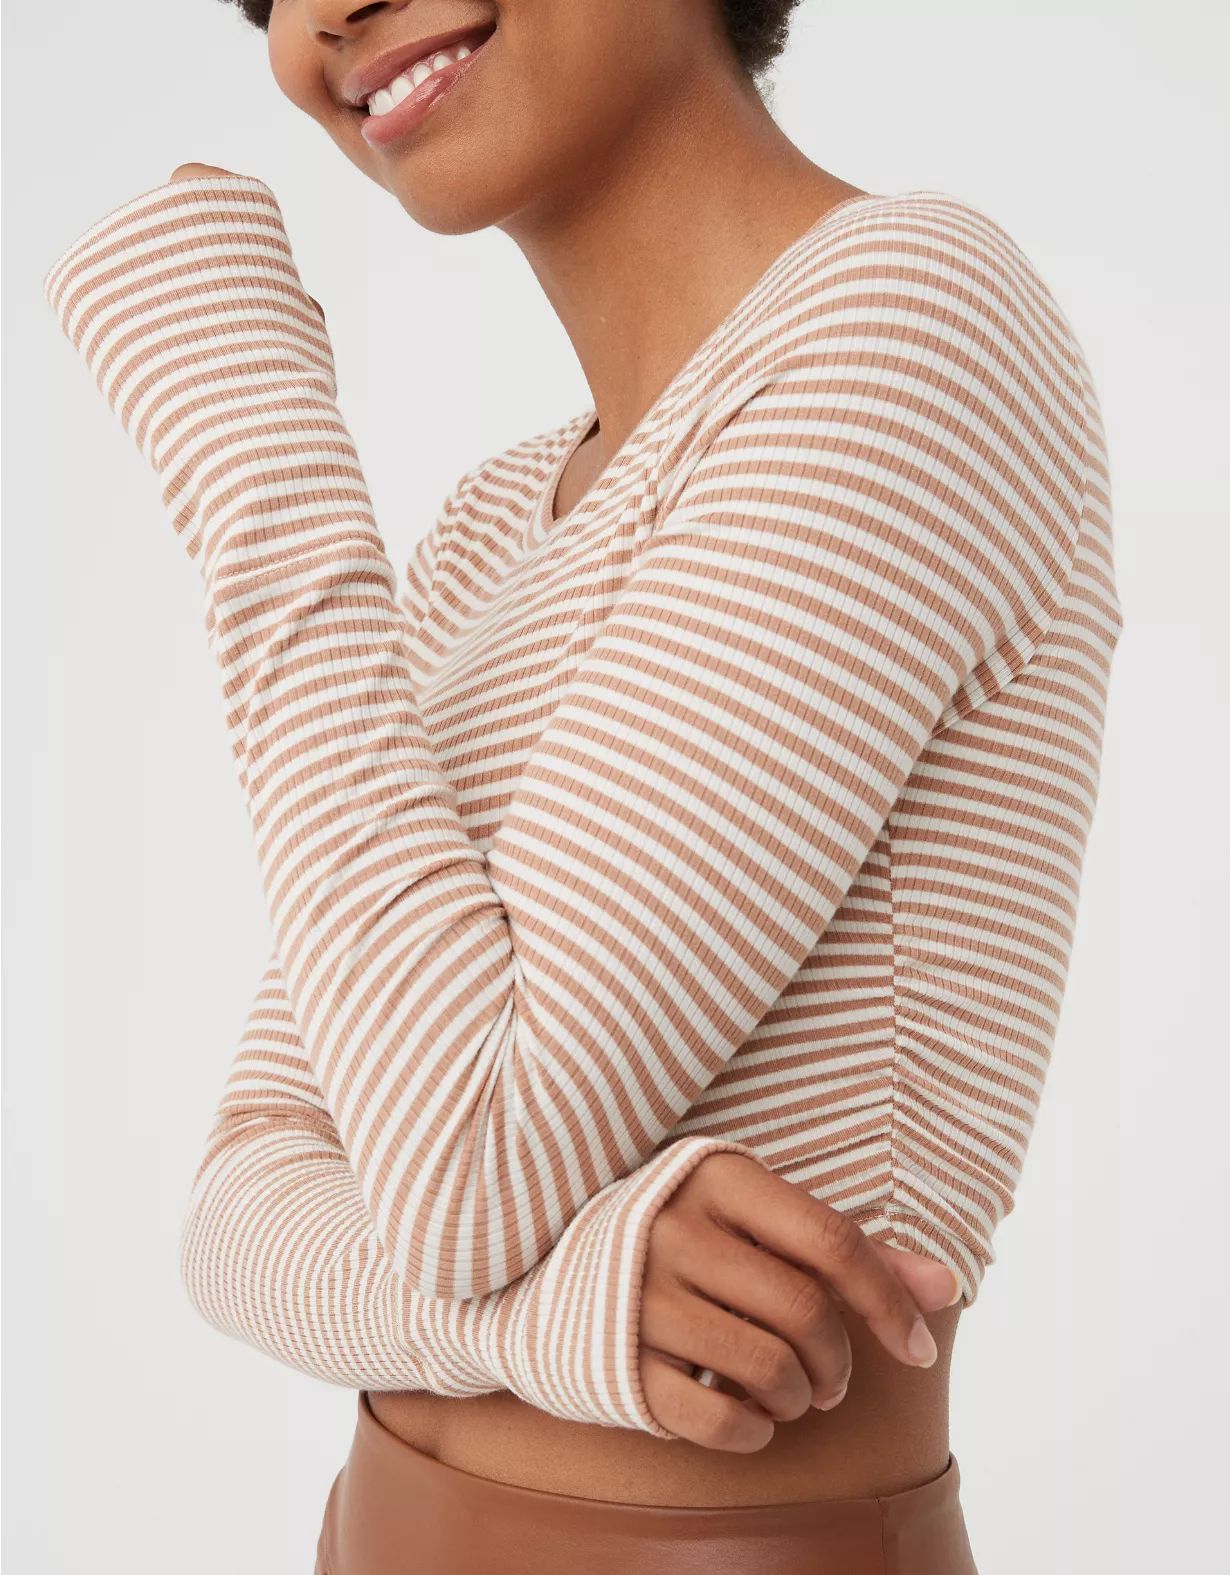 OFFLINE By Aerie Thumbs Up Long Sleeve Ruched T-Shirt | Aerie